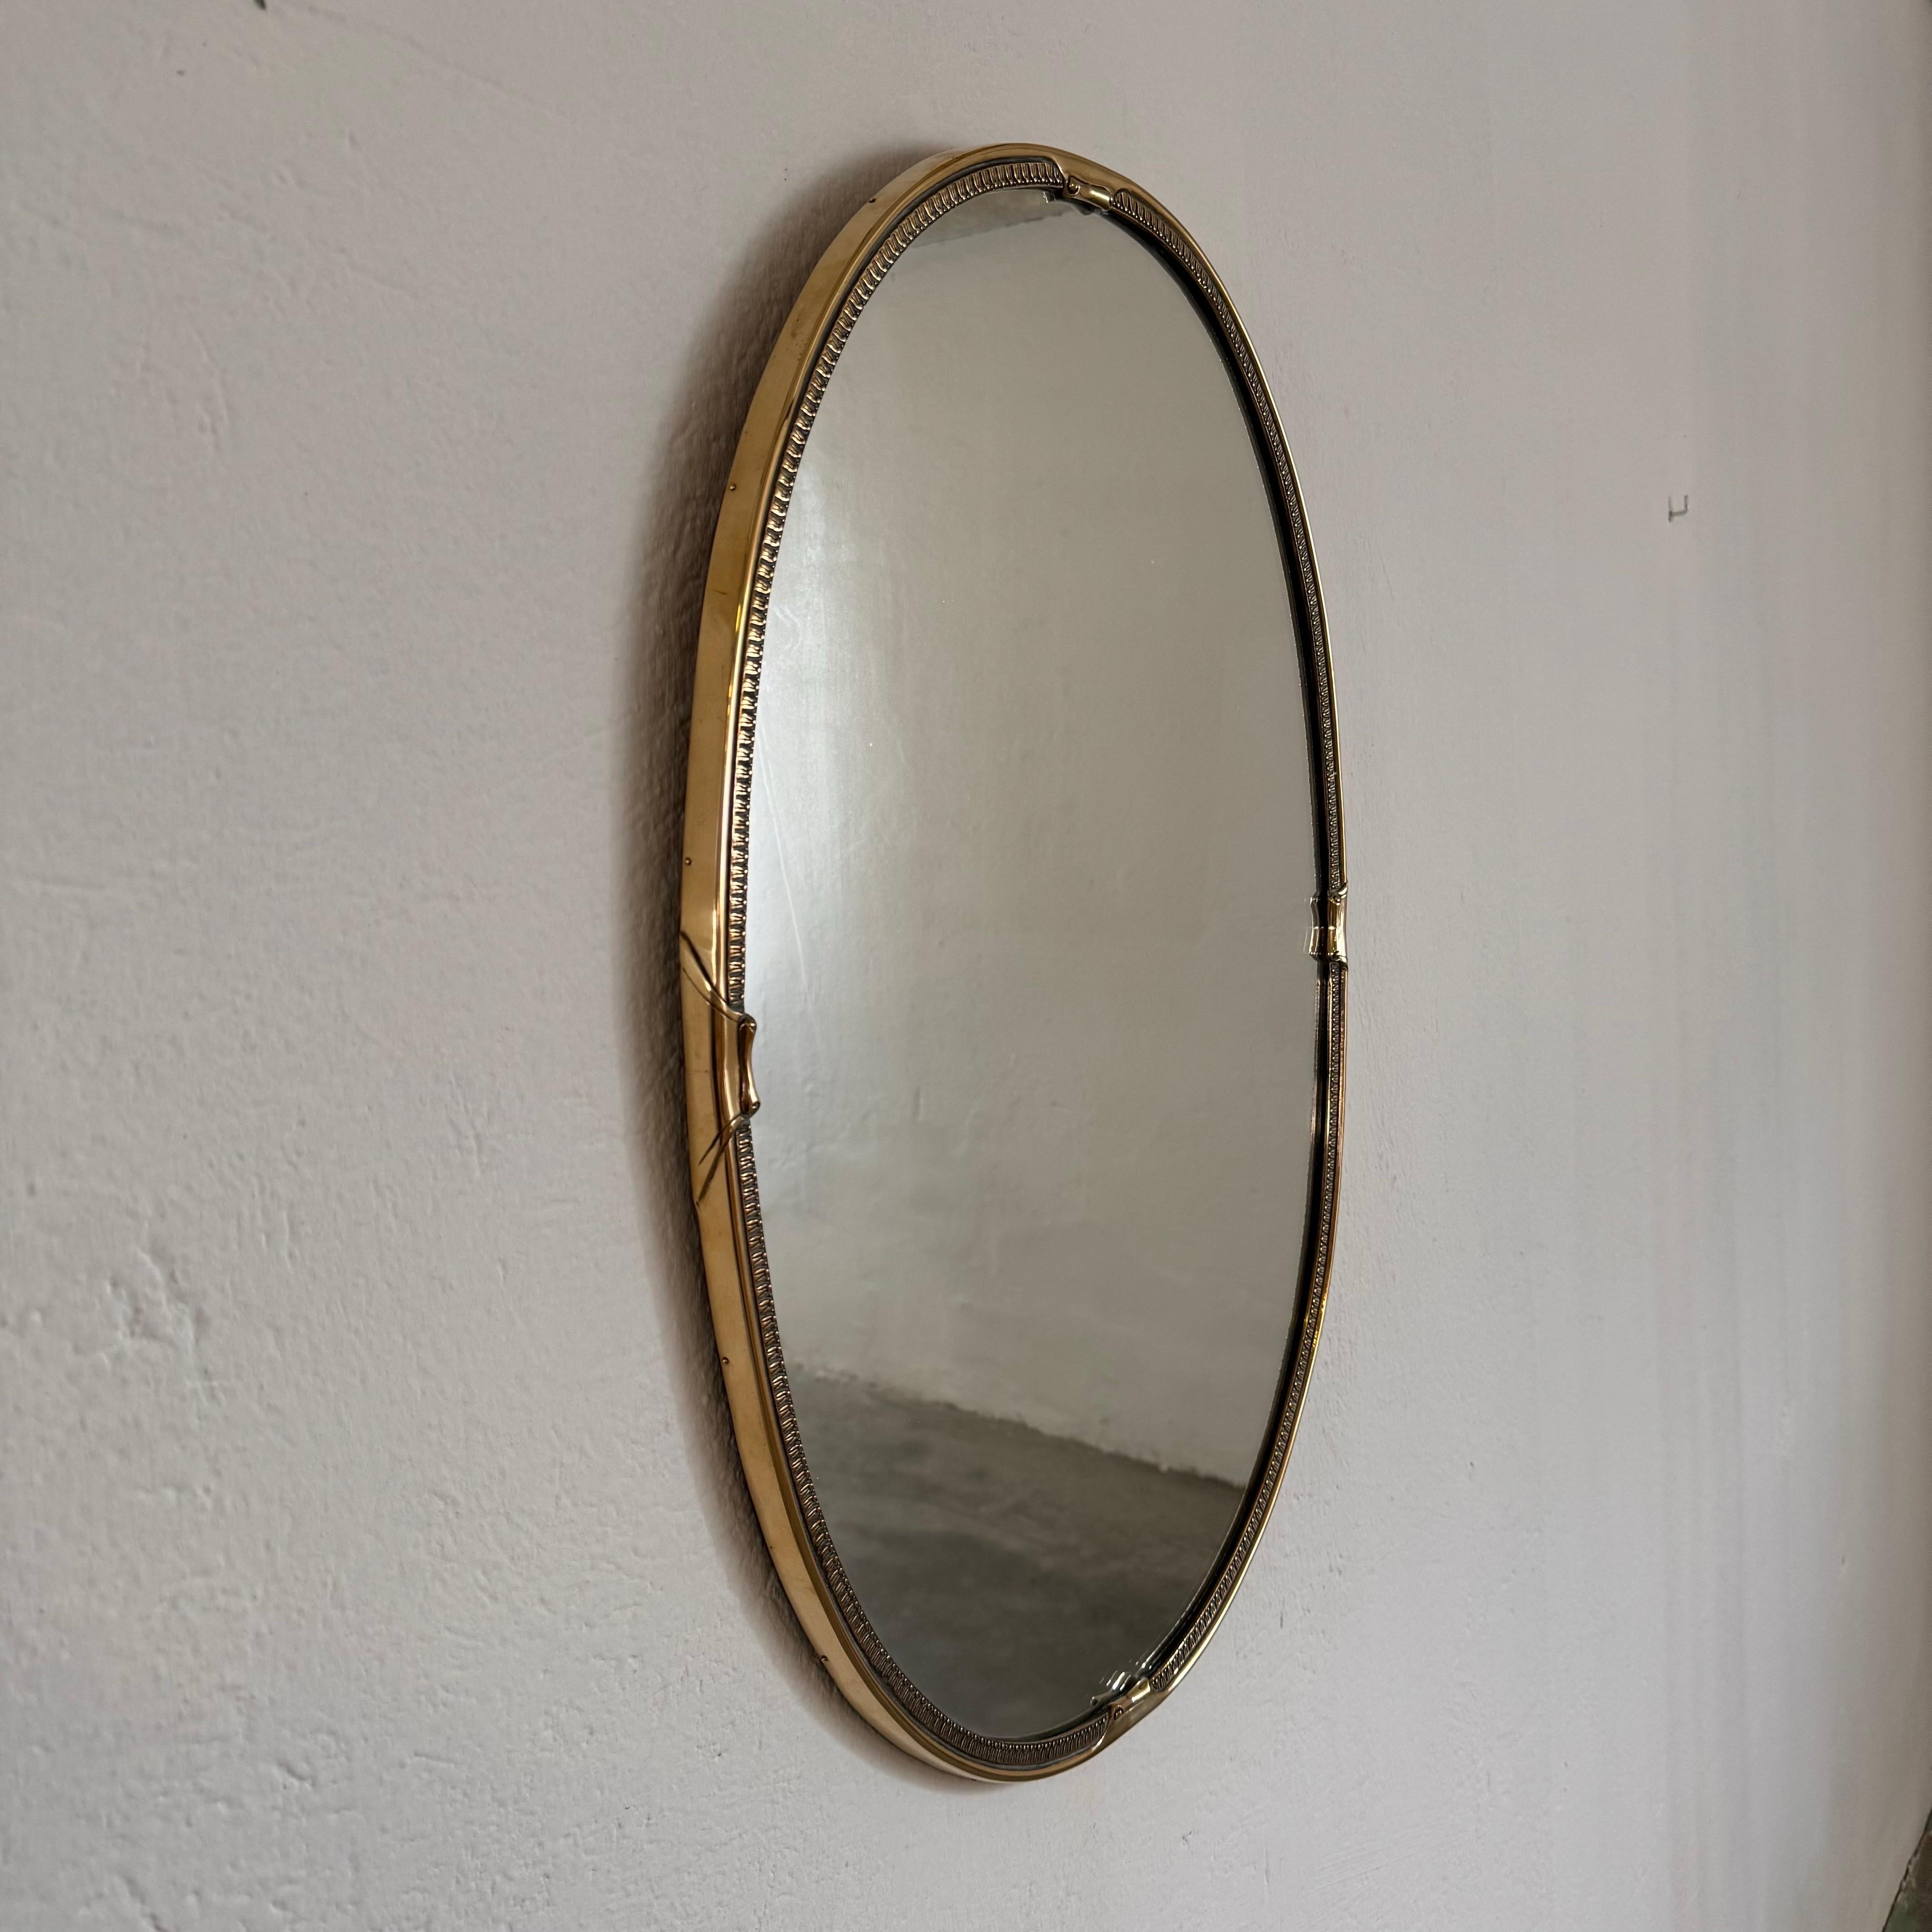 Step into the timeless elegance of mid-century Italian design with this exquisite brass mirror, reminiscent of the iconic style championed by the legendary Gio Ponti. Crafted in the 1950s, this mirror hails from a prestigious goldsmith in the heart